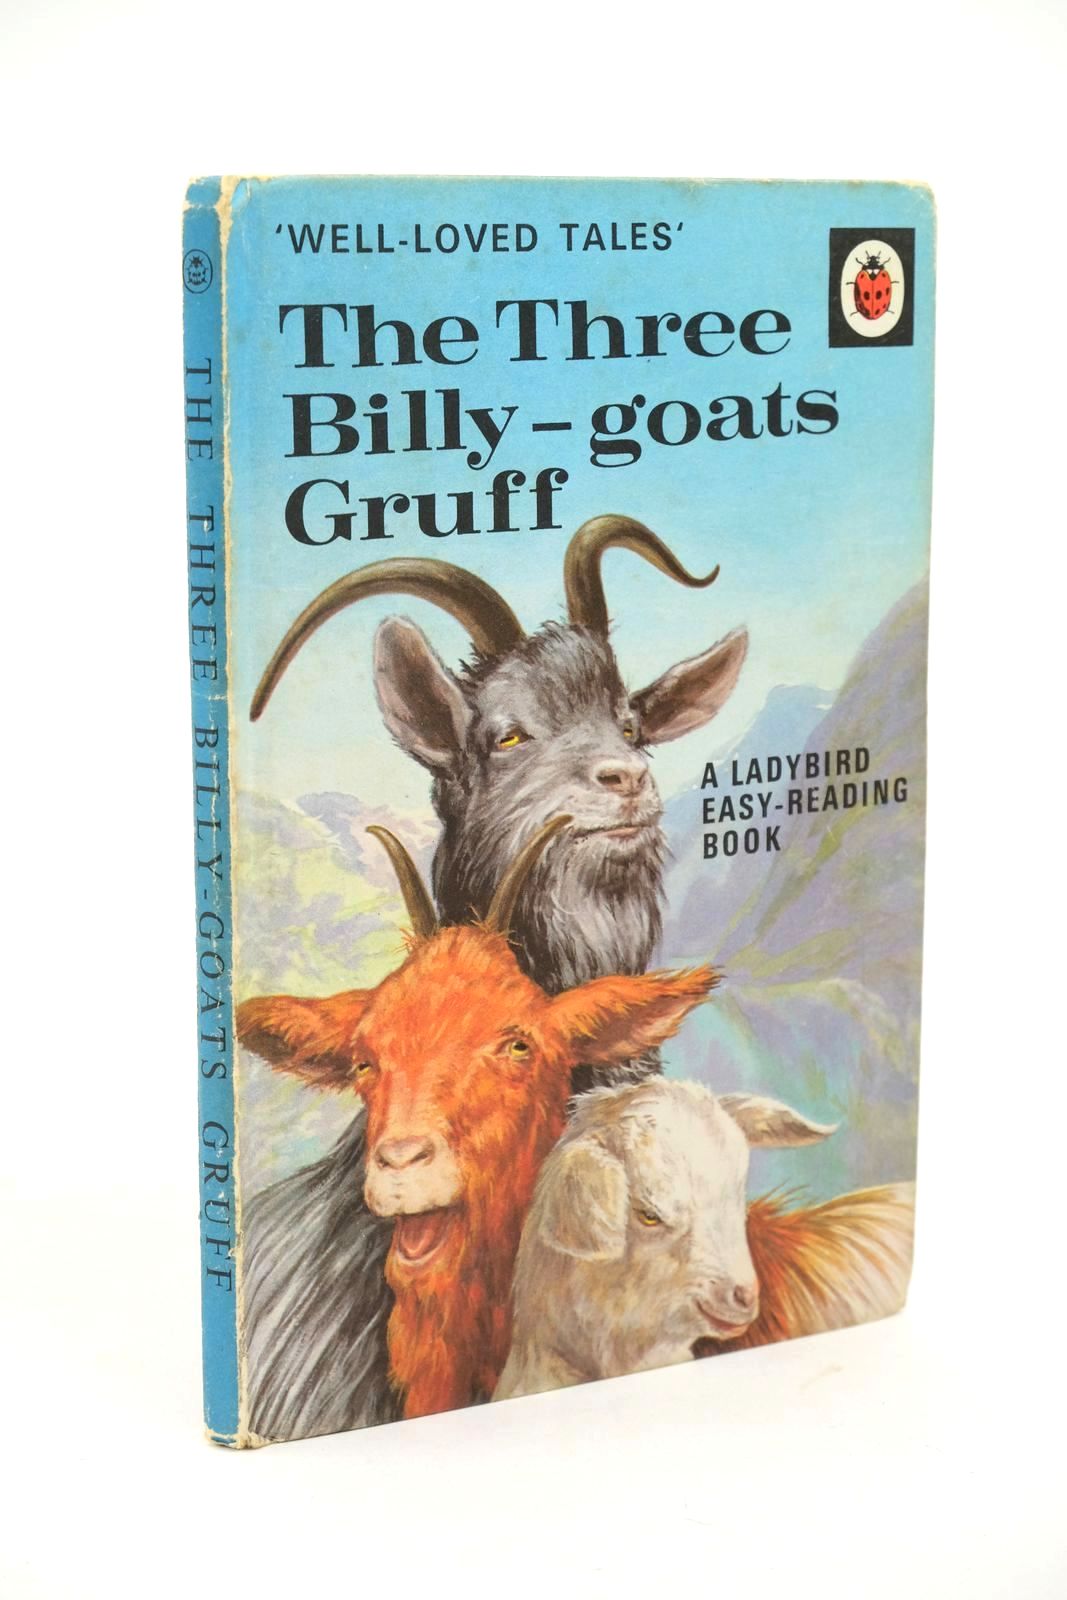 Photo of THE THREE BILLY-GOATS GRUFF written by Southgate, Vera illustrated by Lumley, Robert published by Wills & Hepworth Ltd. (STOCK CODE: 1323155)  for sale by Stella & Rose's Books